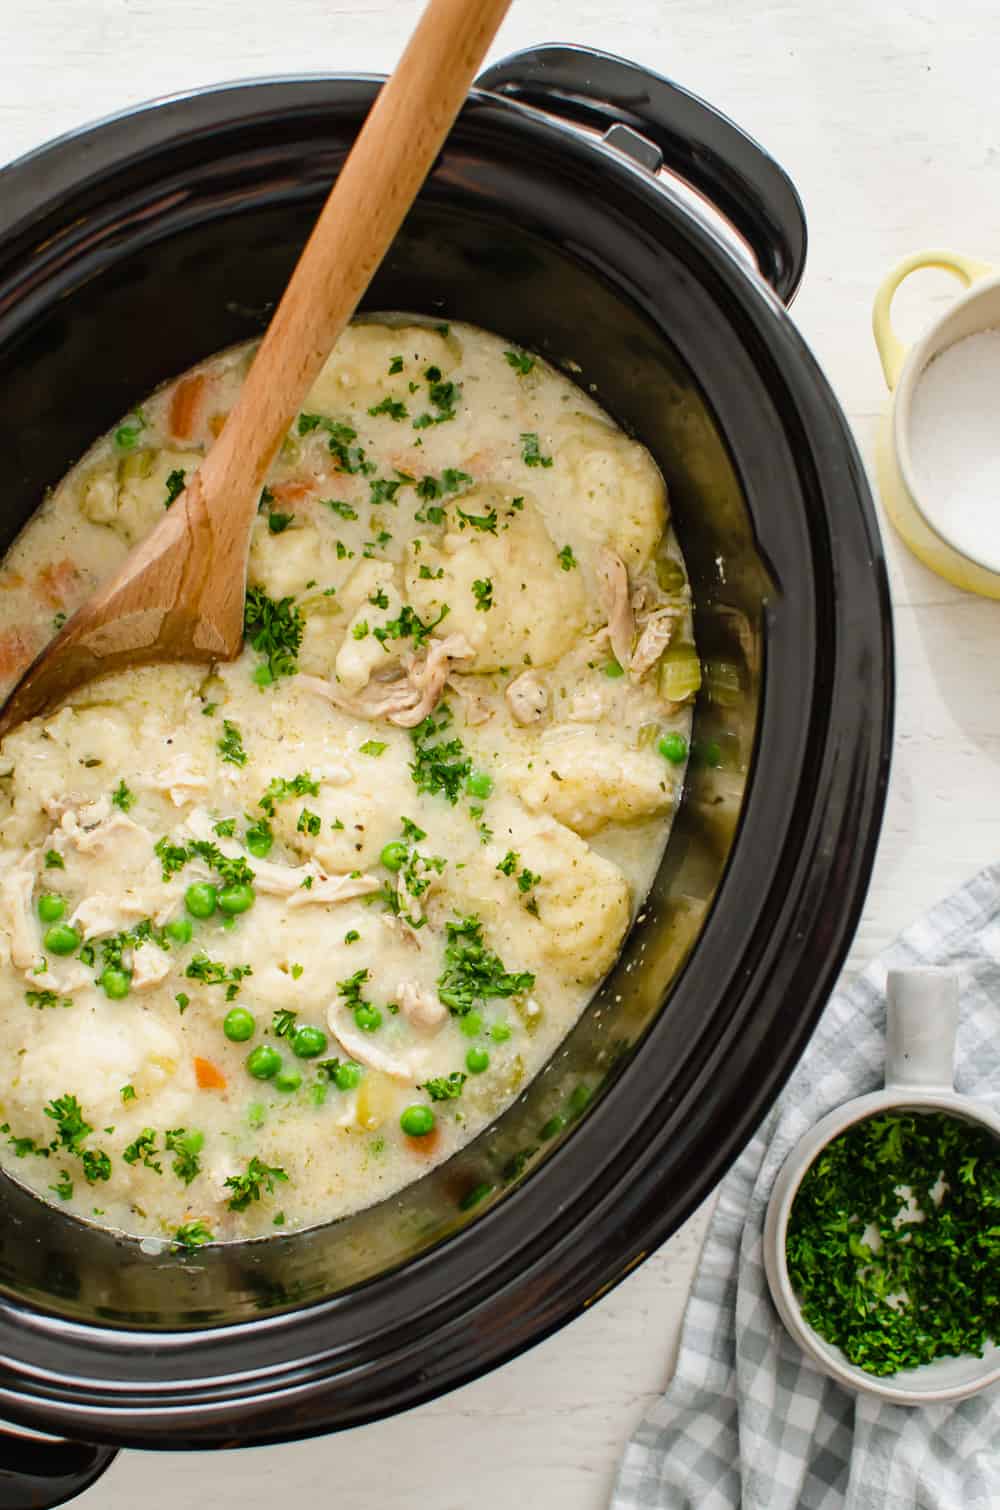 Crock Pot chicken and dumplings finished up with minced parsley sprinkled on top.